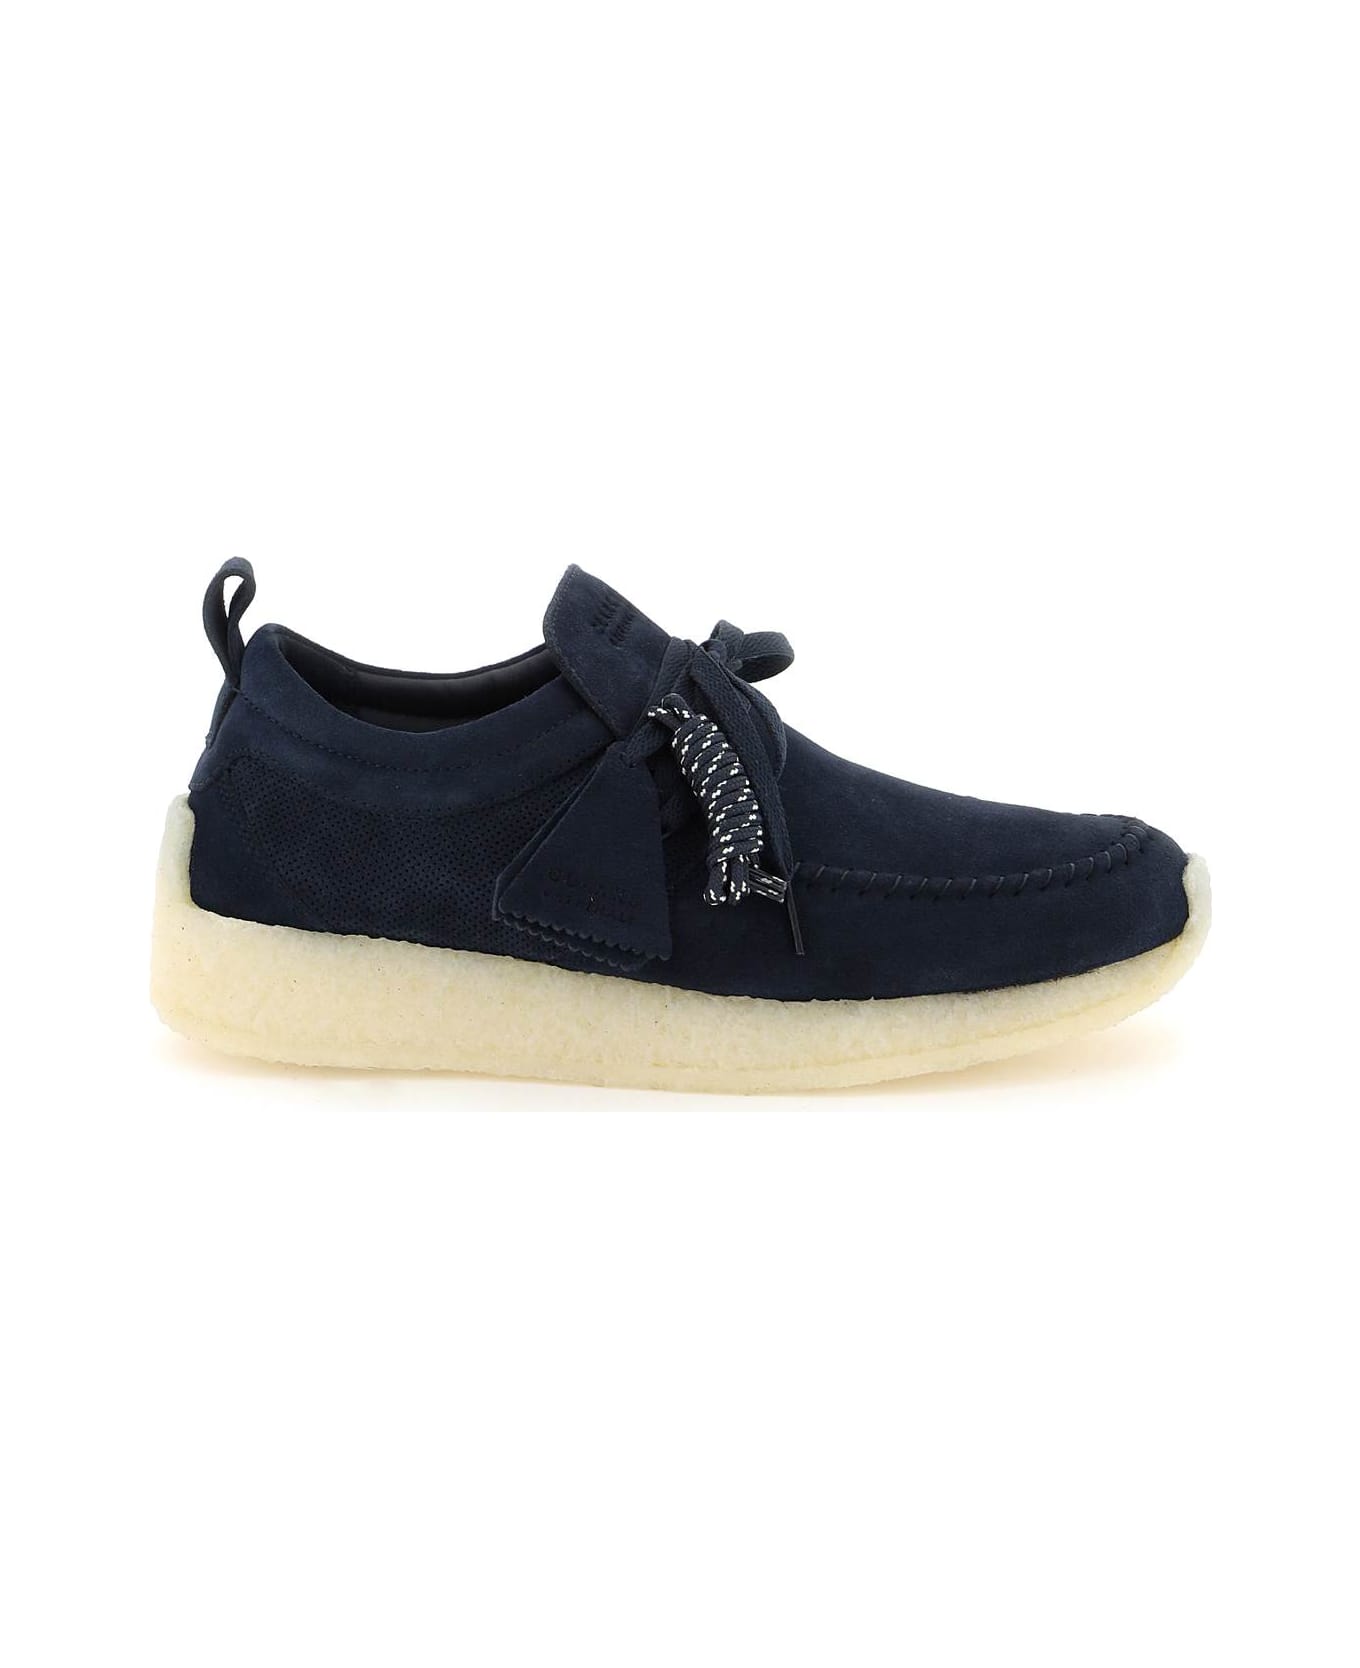 Clarks 'maycliffe' Lace-up Shoes - DARK BLUE (Blue)